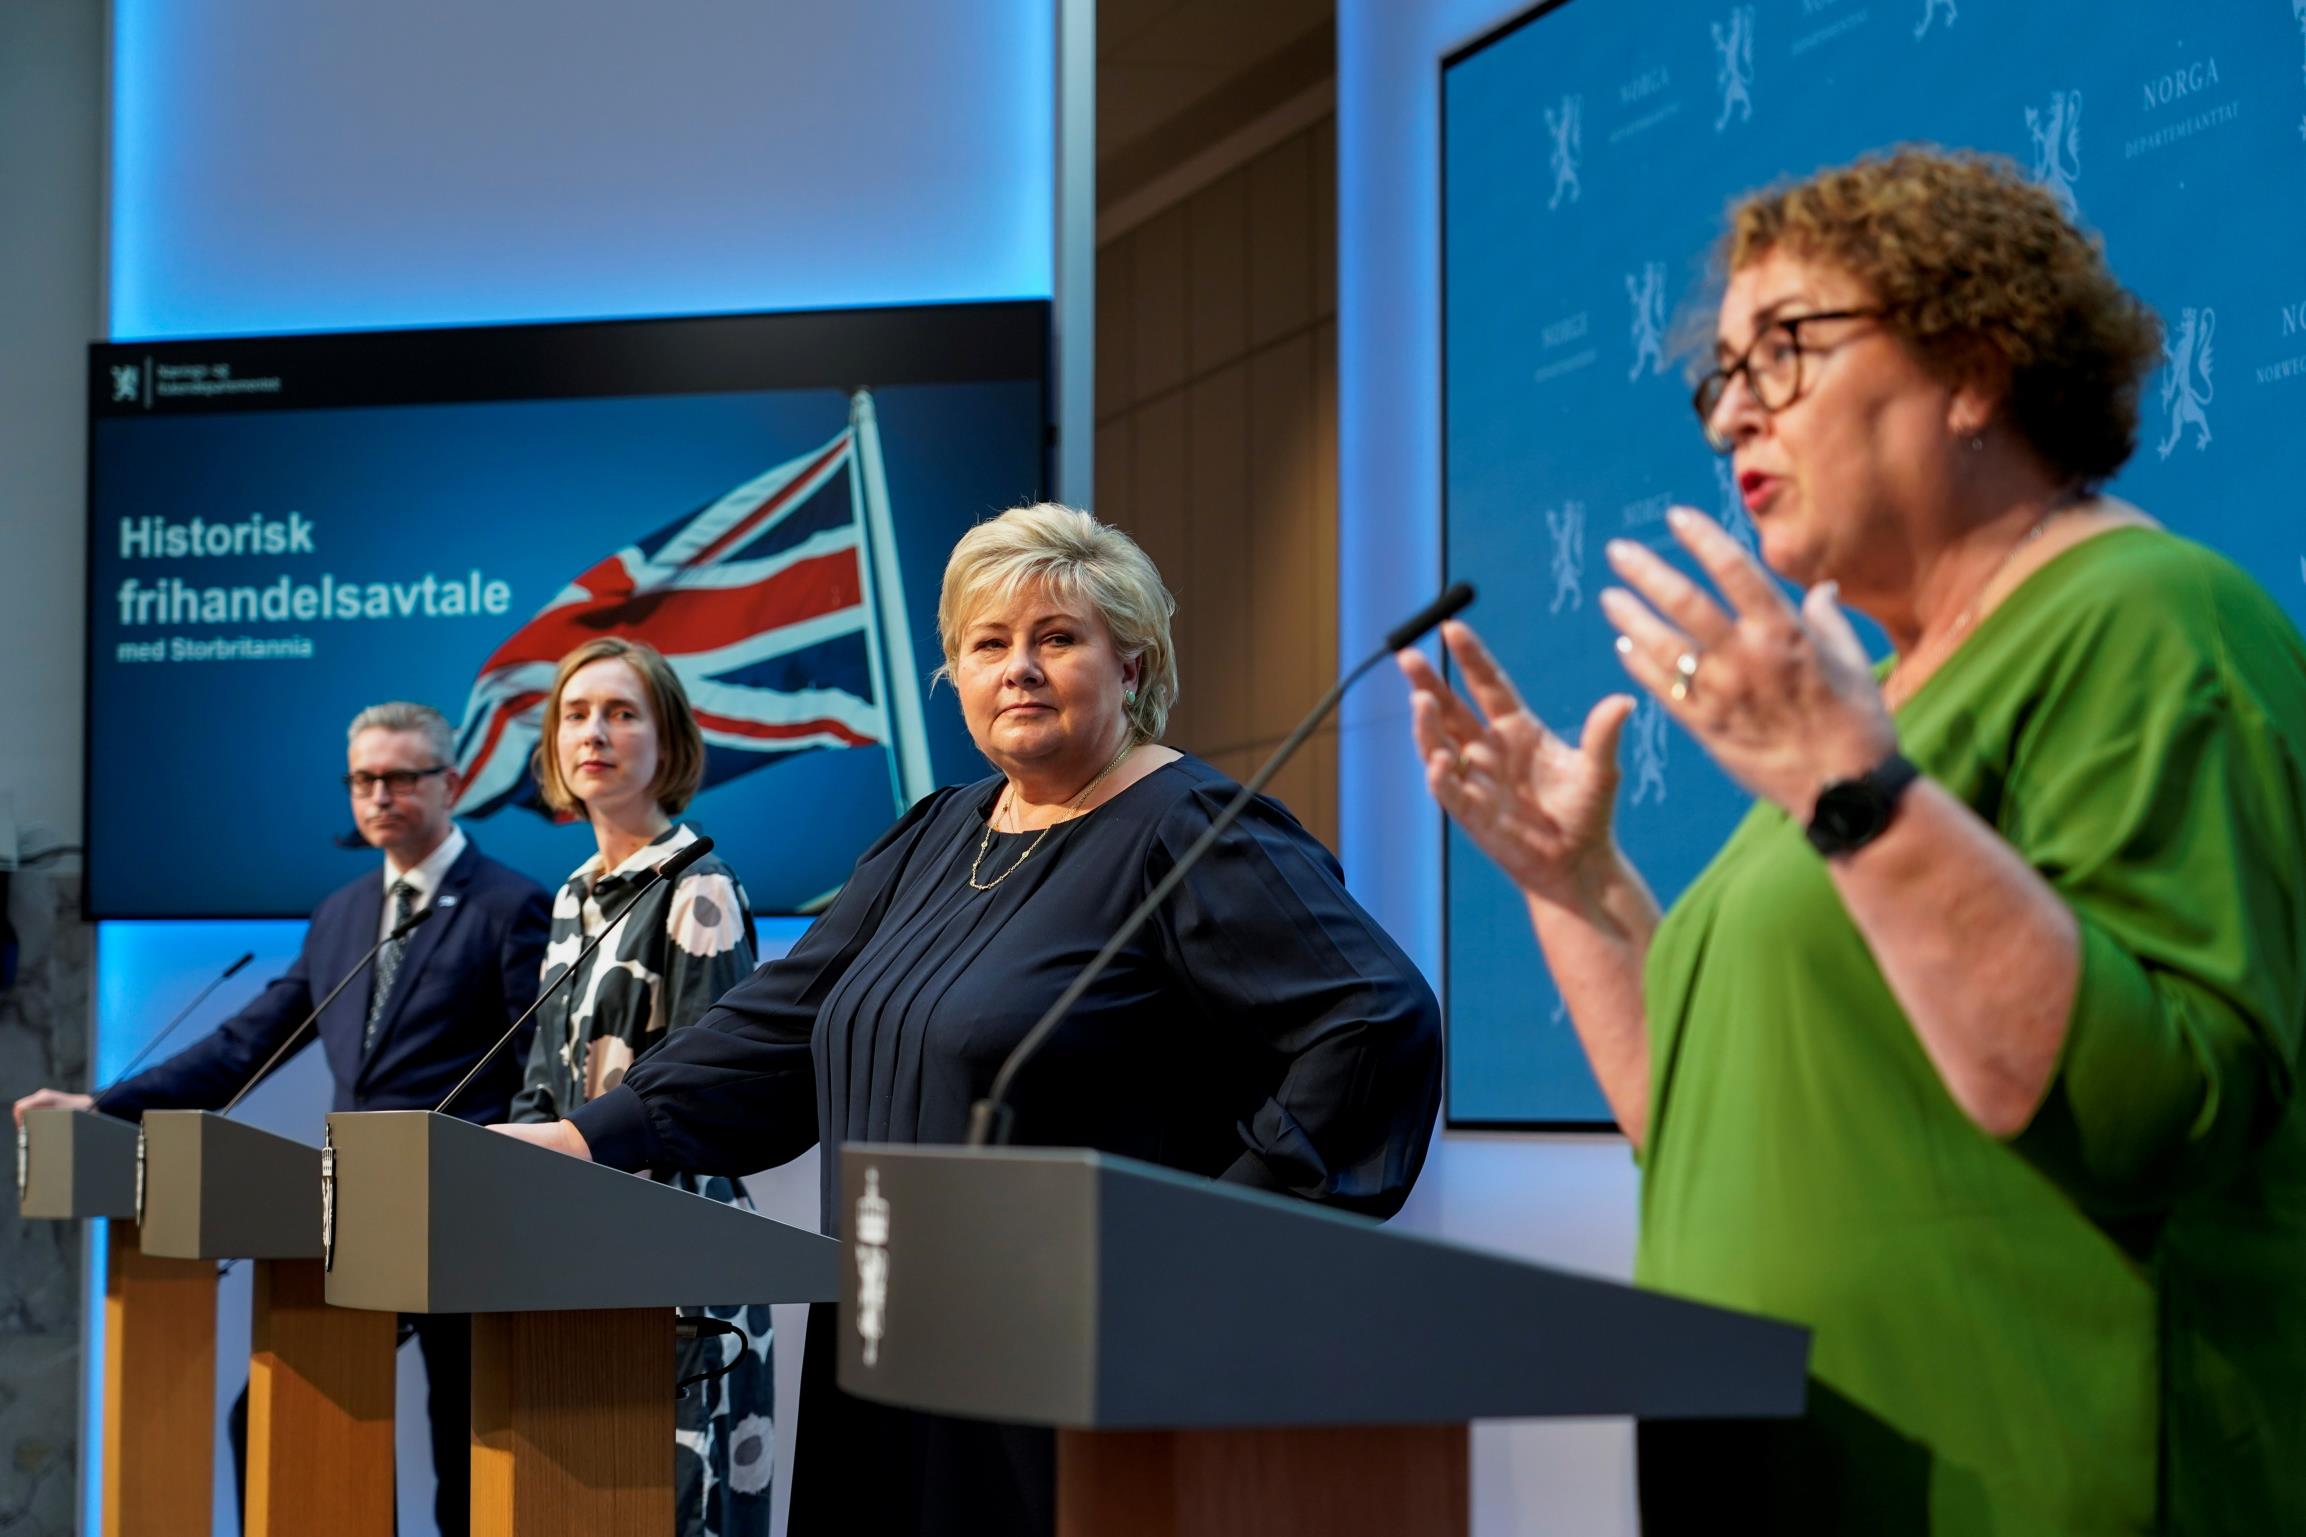 Norway's Minister of Fisheries and Seafood Odd Emil Ingebrigtsen, Minister of Trade and Industry Iselin Nyboe, Prime Minister Erna Solberg, and Minister of Agriculture and Food Olaug Bollestad attend a news co<em></em>nference on the status of free trade negotiations with the United Kingdom, in Oslo, Norway June 4, 2021. NTB/Gorm Kallestad via REUTERS